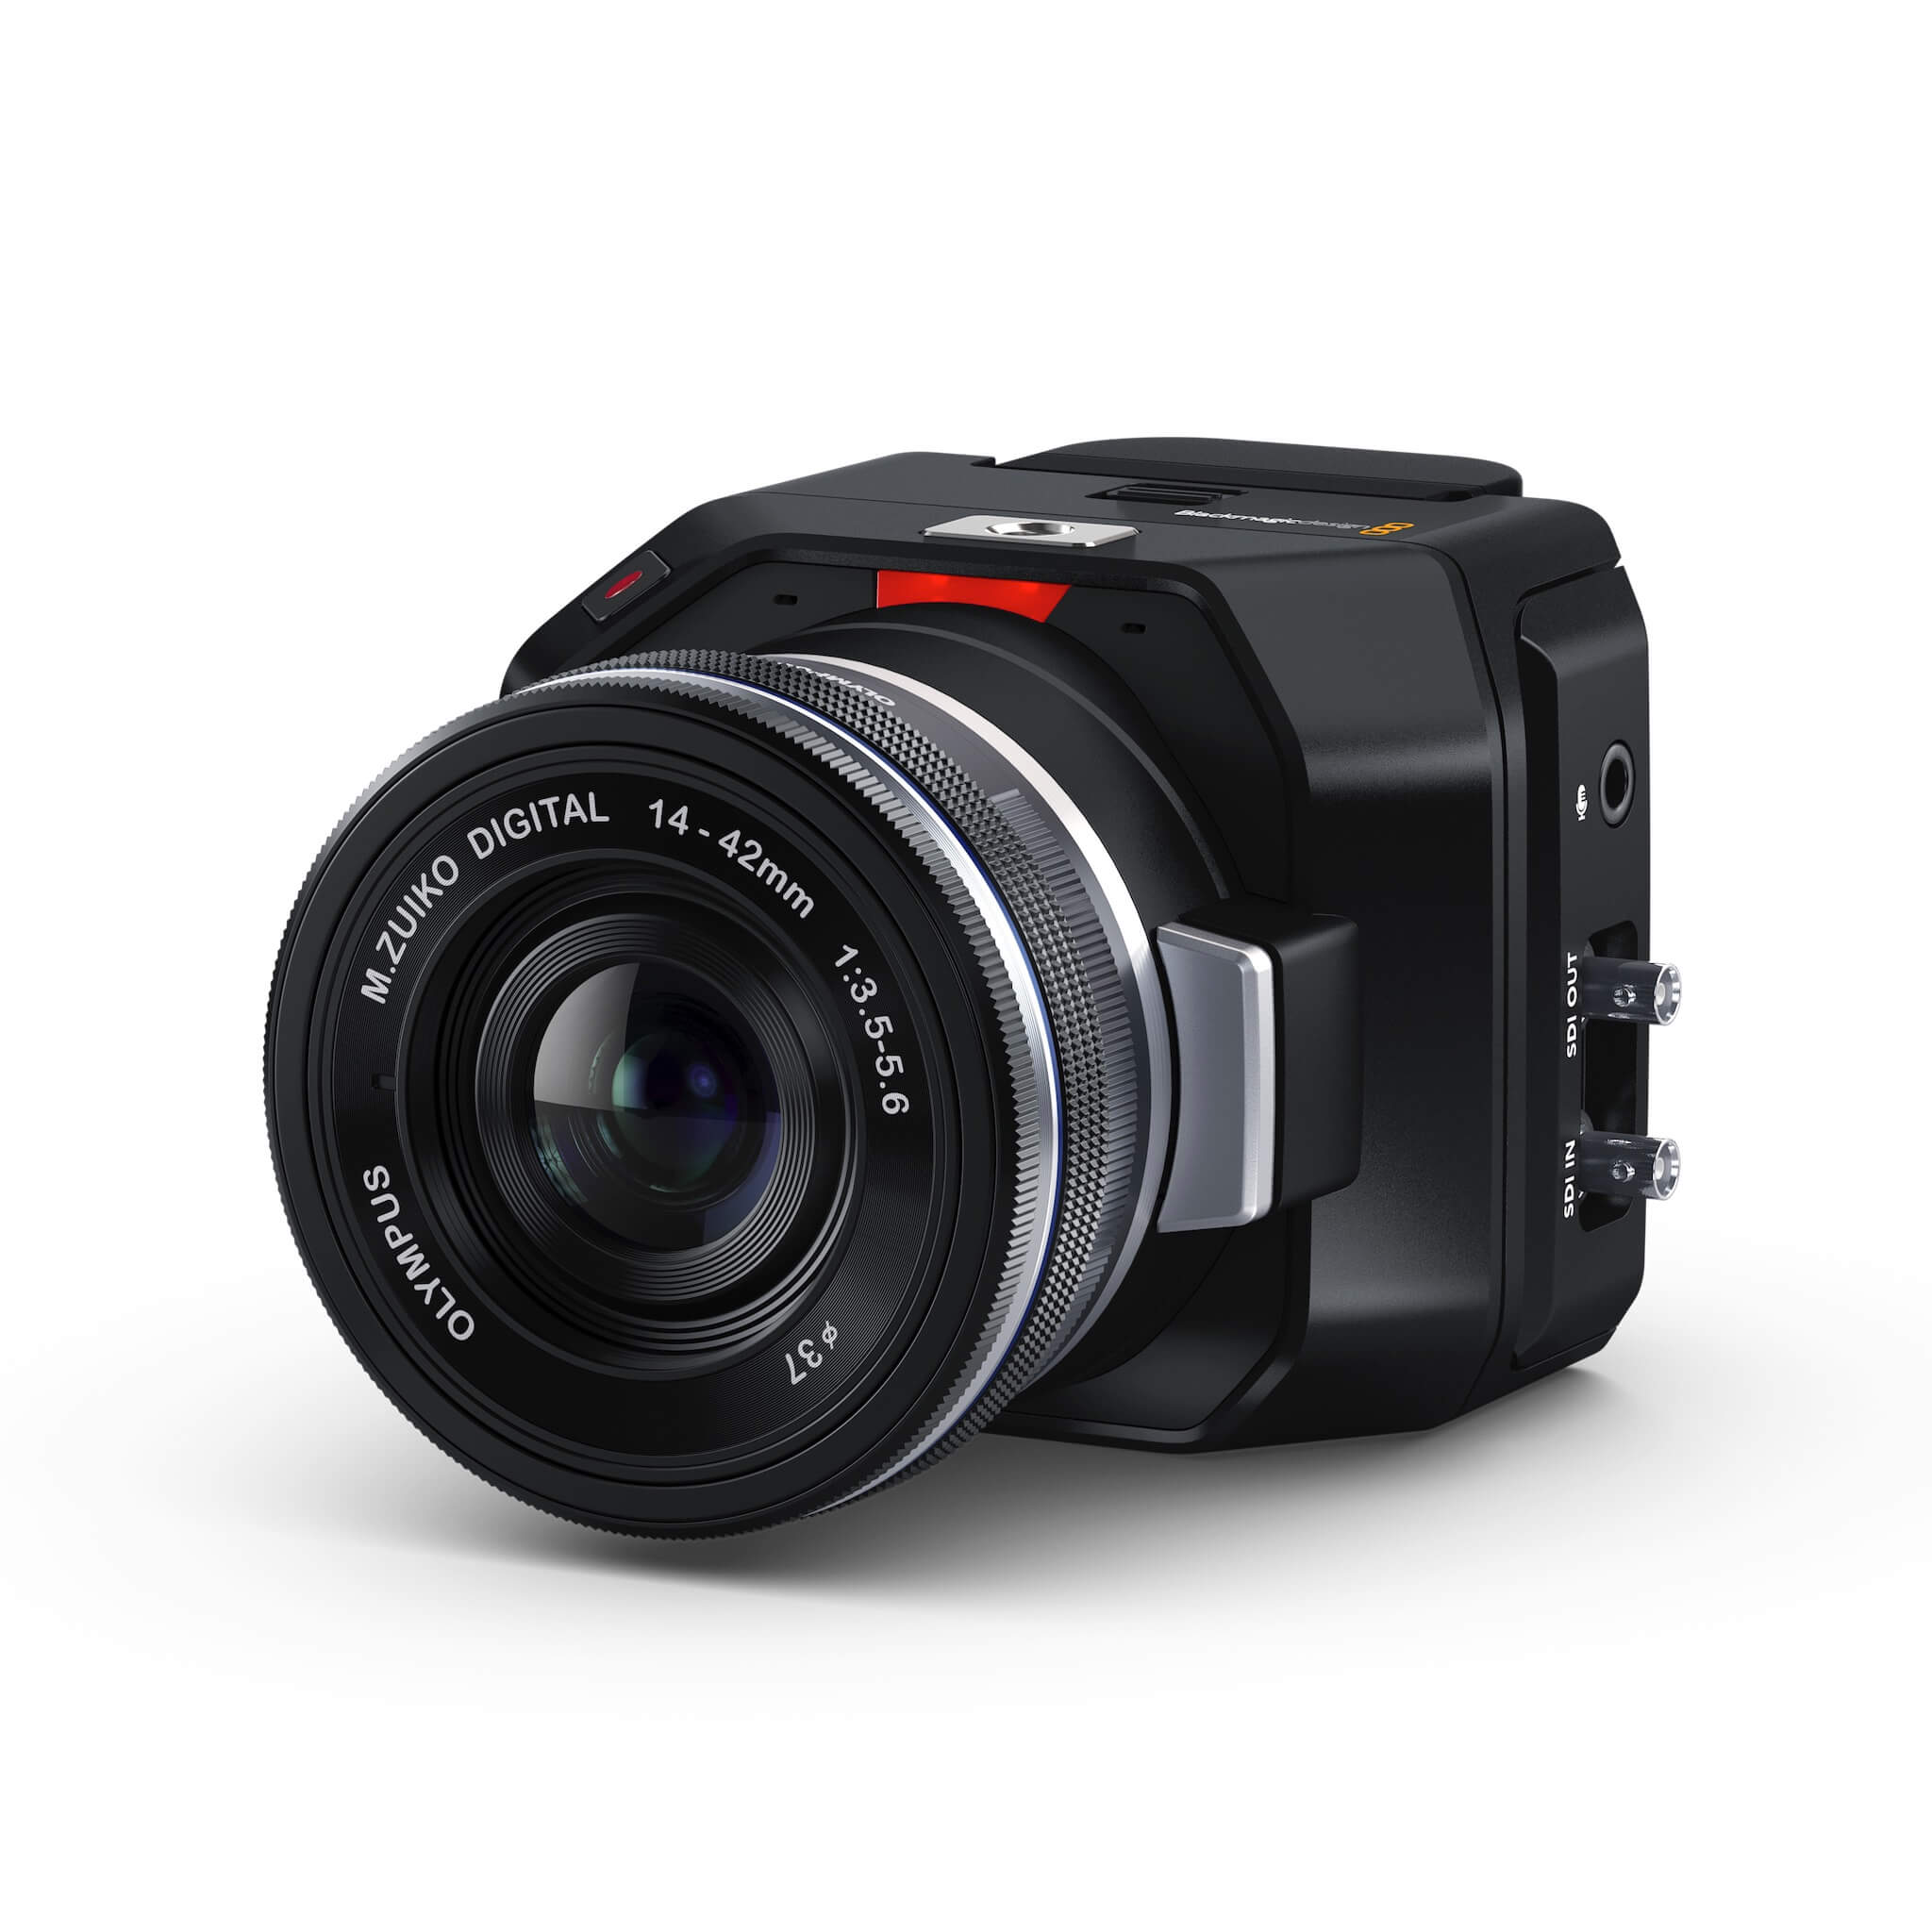 Reviewing The New Blackmagic Design Broadcast G2 Camera